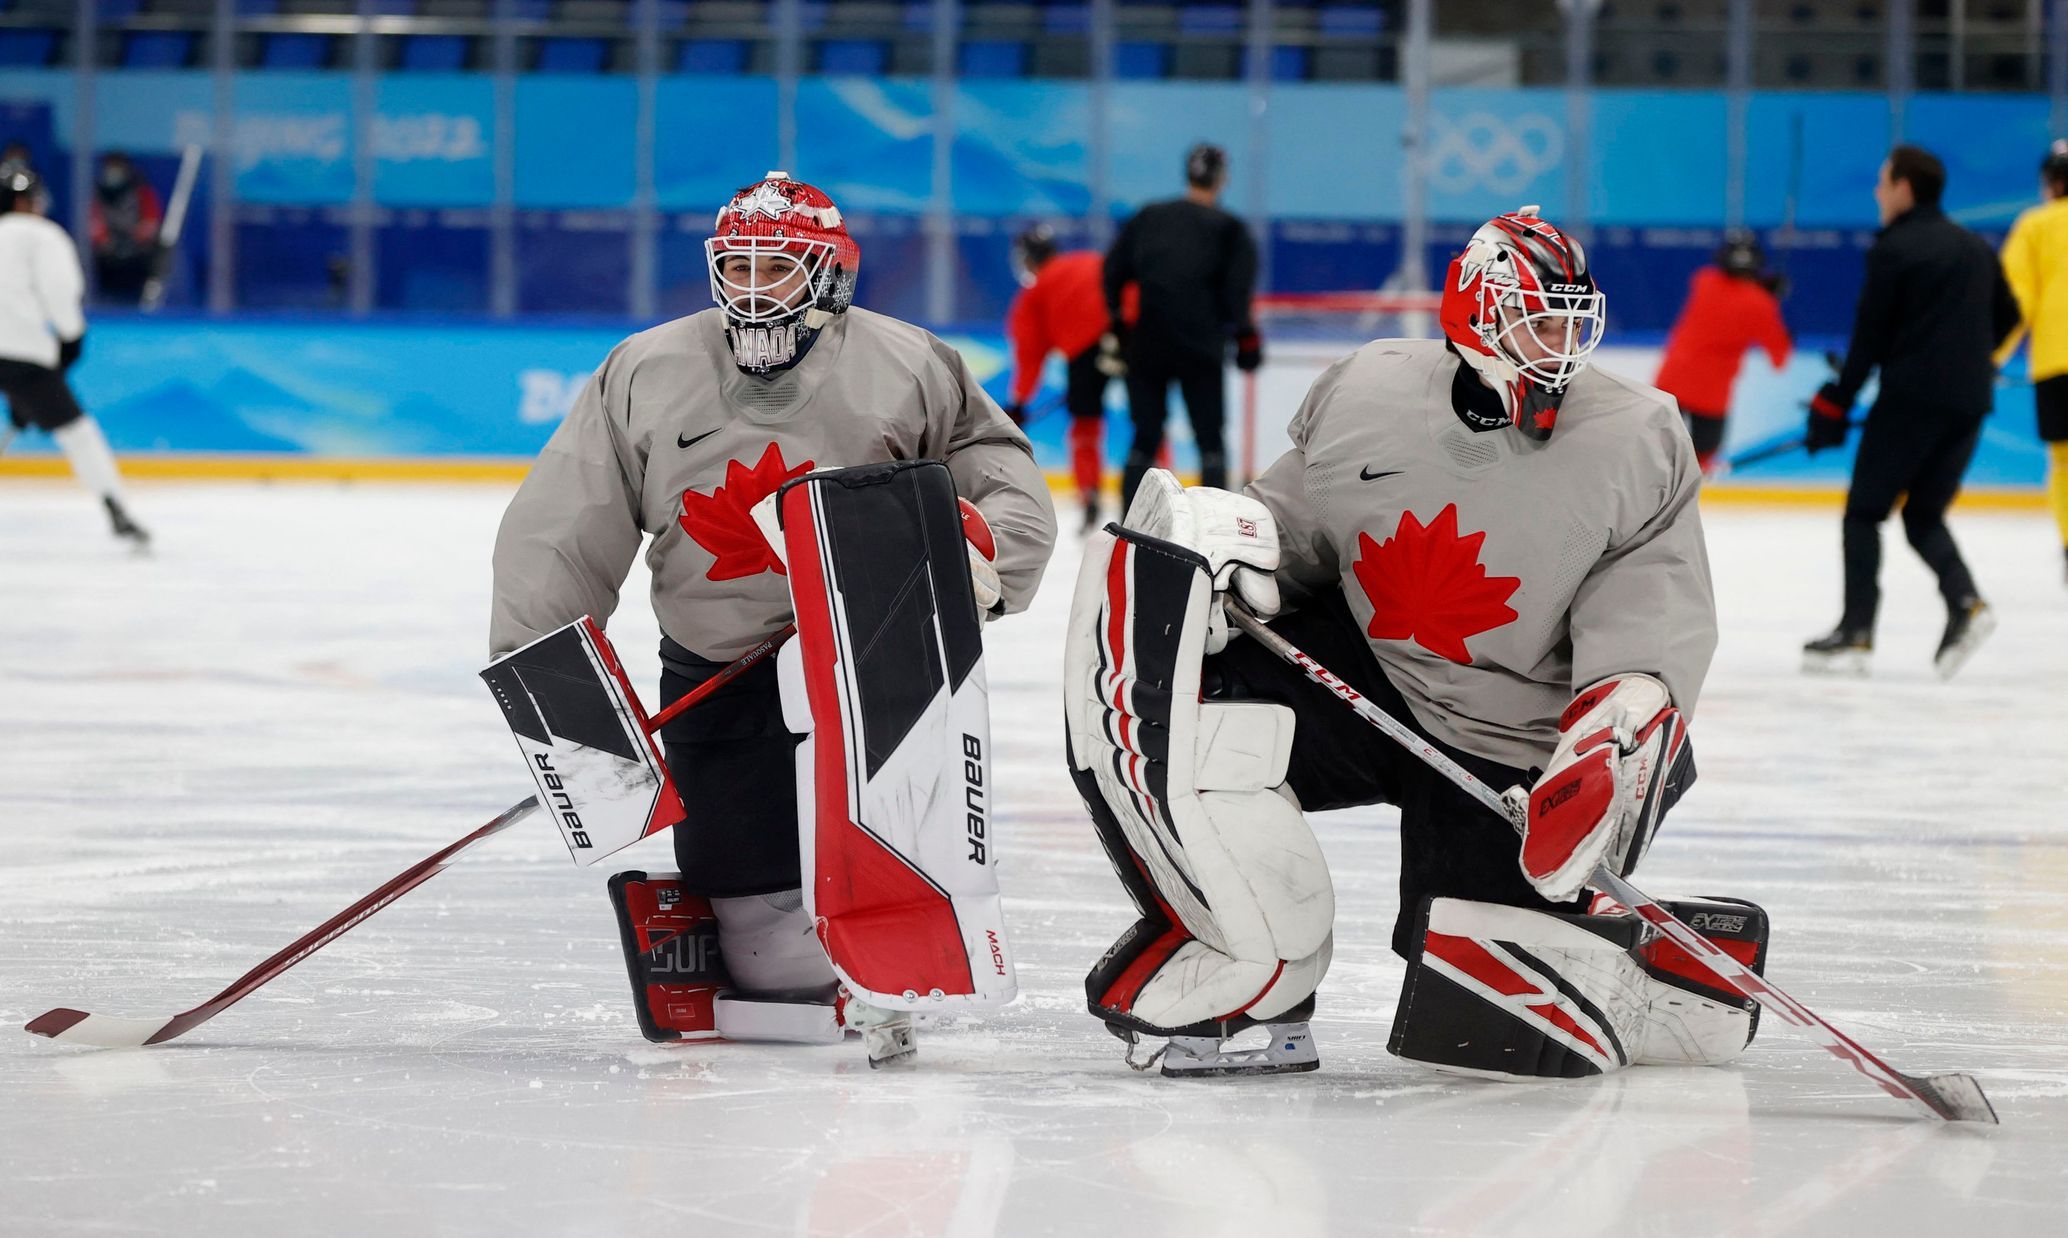 Canada’s Dilemma: The Search for a Goalkeeper for the Best vs. Best Tournament